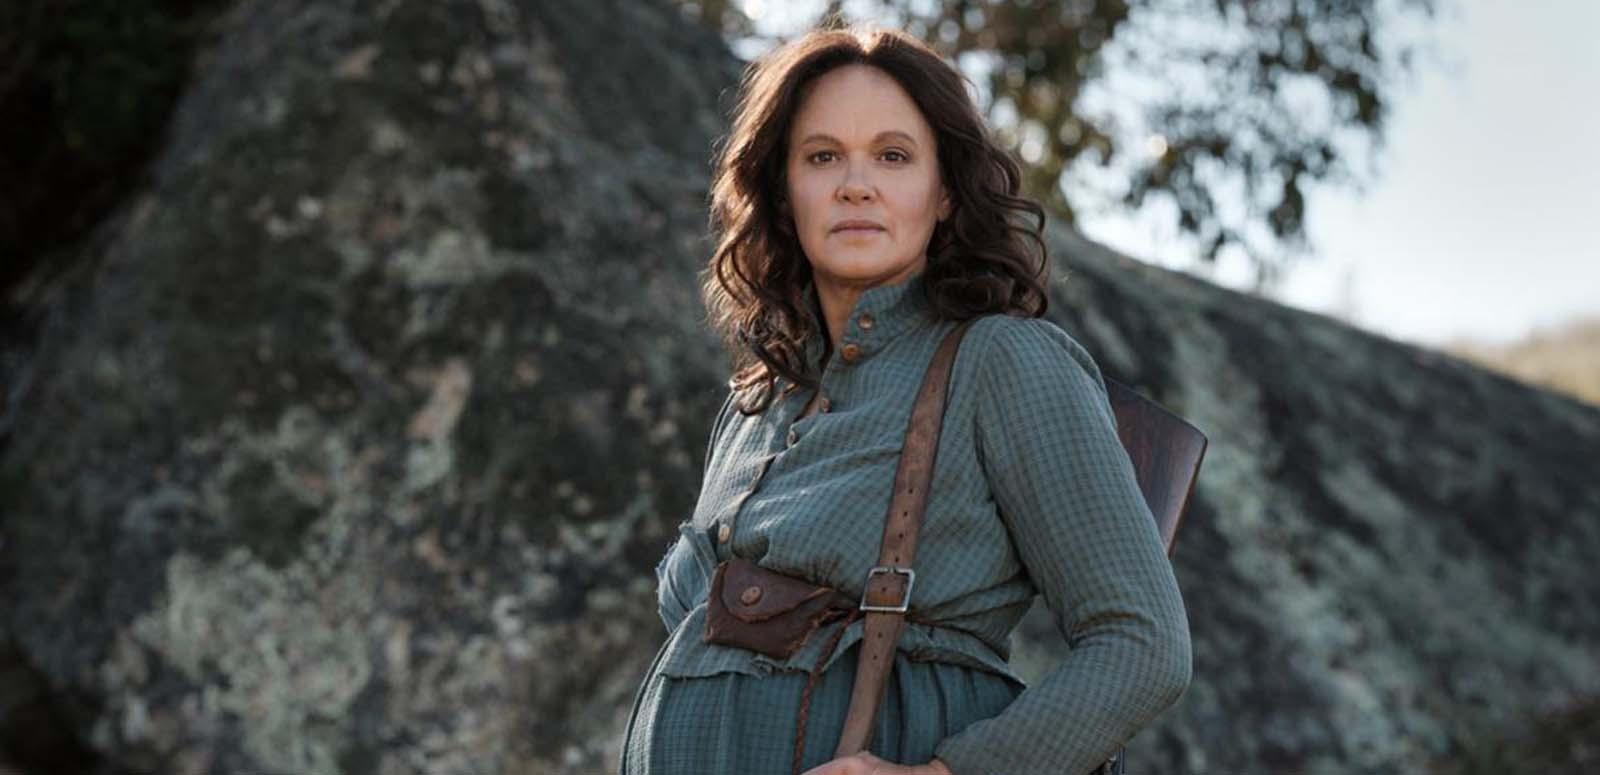 Leah Purcell as a pregrant bushwoman, standing outside in a rocky bush landscape in her film of The Drover's Wife